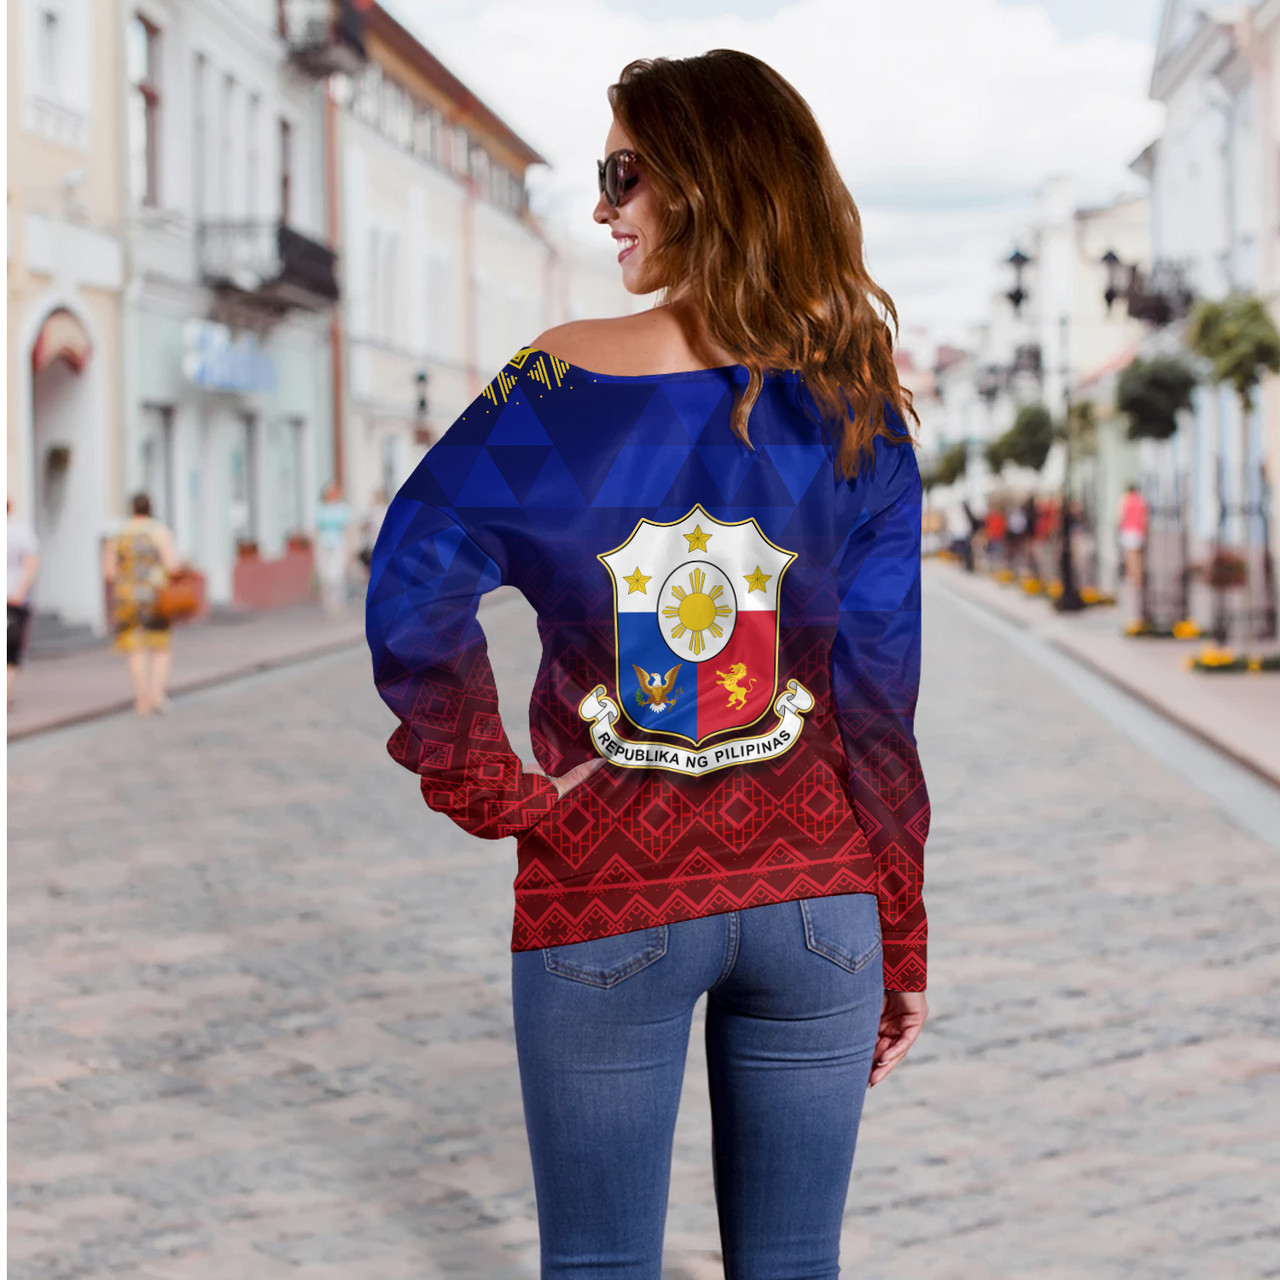 Philippines Filipinos Off Shoulder Sweatshirt Lowpolly Pattern with Tribal Motif